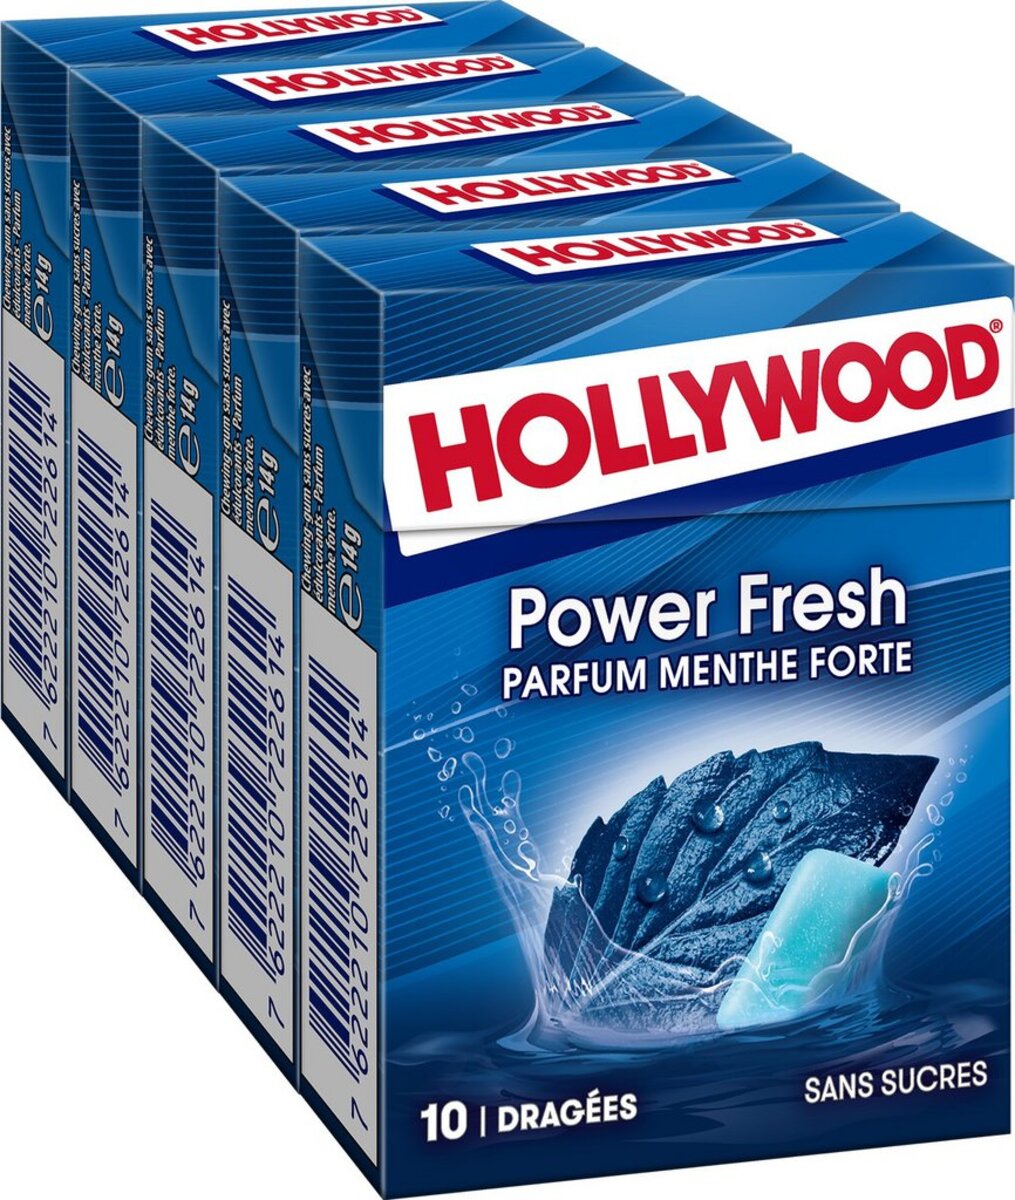 Hollywood Chewing-gum menthe forte s/sucres - La Poste